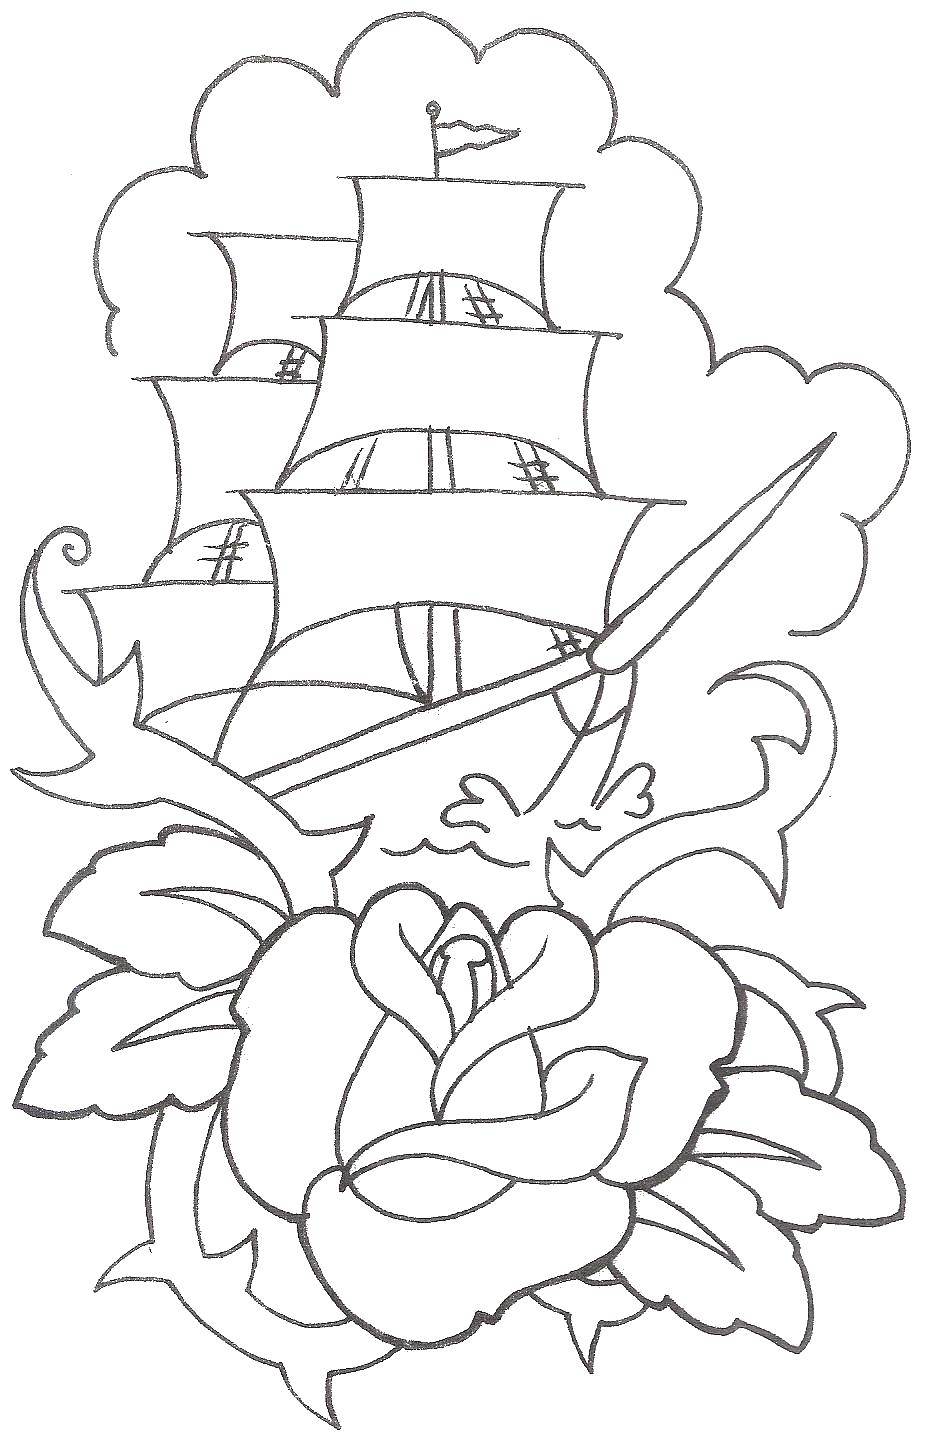 Coloring Ship and rose. Category marine. Tags:  Ship, water.